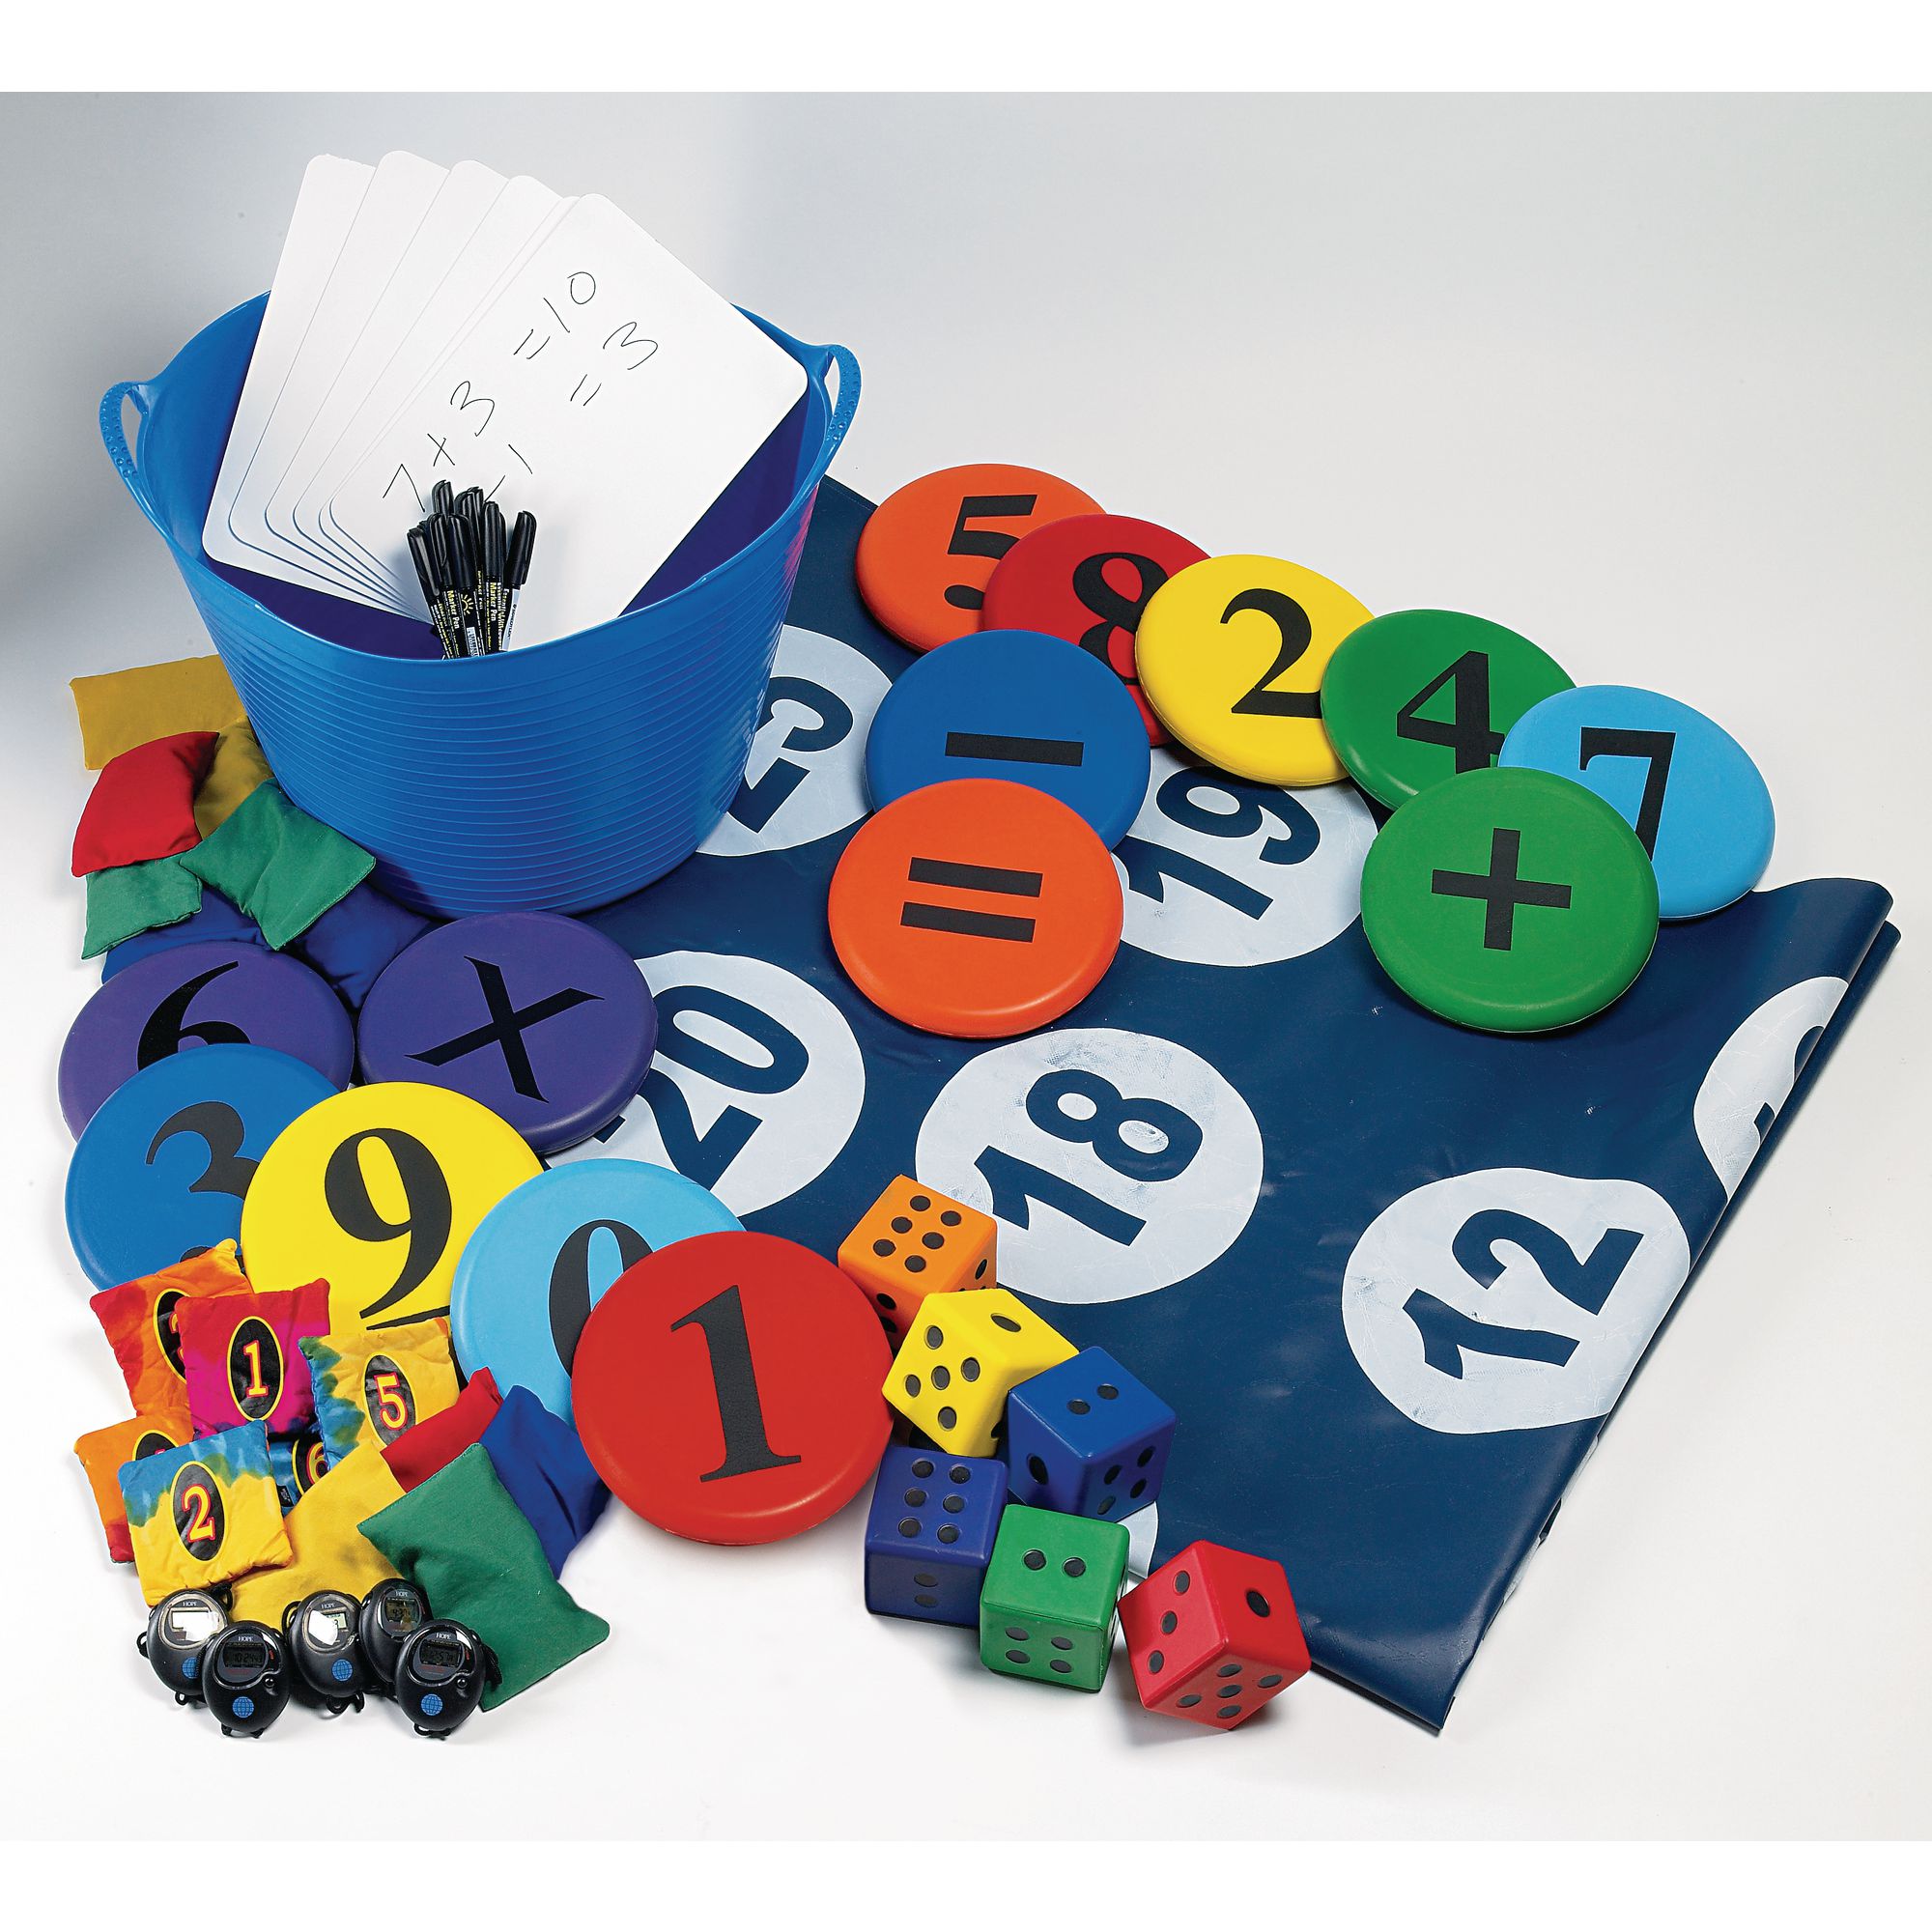 g164898-active-maths-pplaypack-from-hope-education-gls-educational